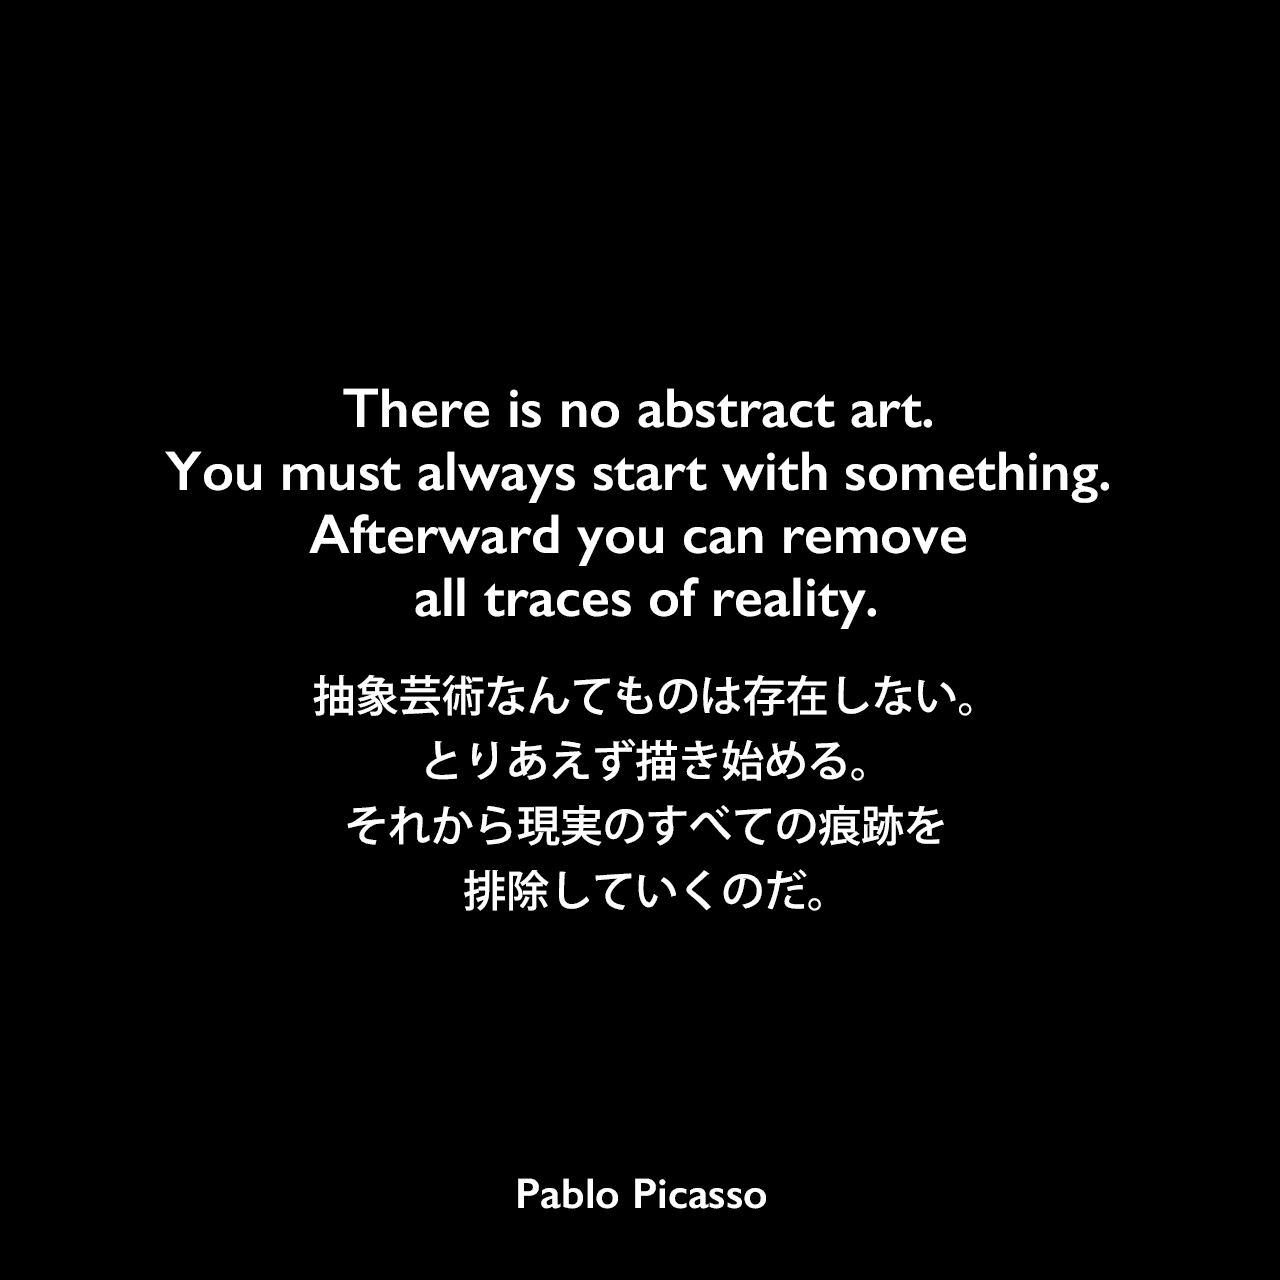 There is no abstract art. You must always start with something. Afterward you can remove all traces of reality.抽象芸術なんてものは存在しない。とりあえず描き始める。それから現実のすべての痕跡を排除していくのだ。- ブラッシャイの本「Conversations with Picasso」よりPablo Picasso